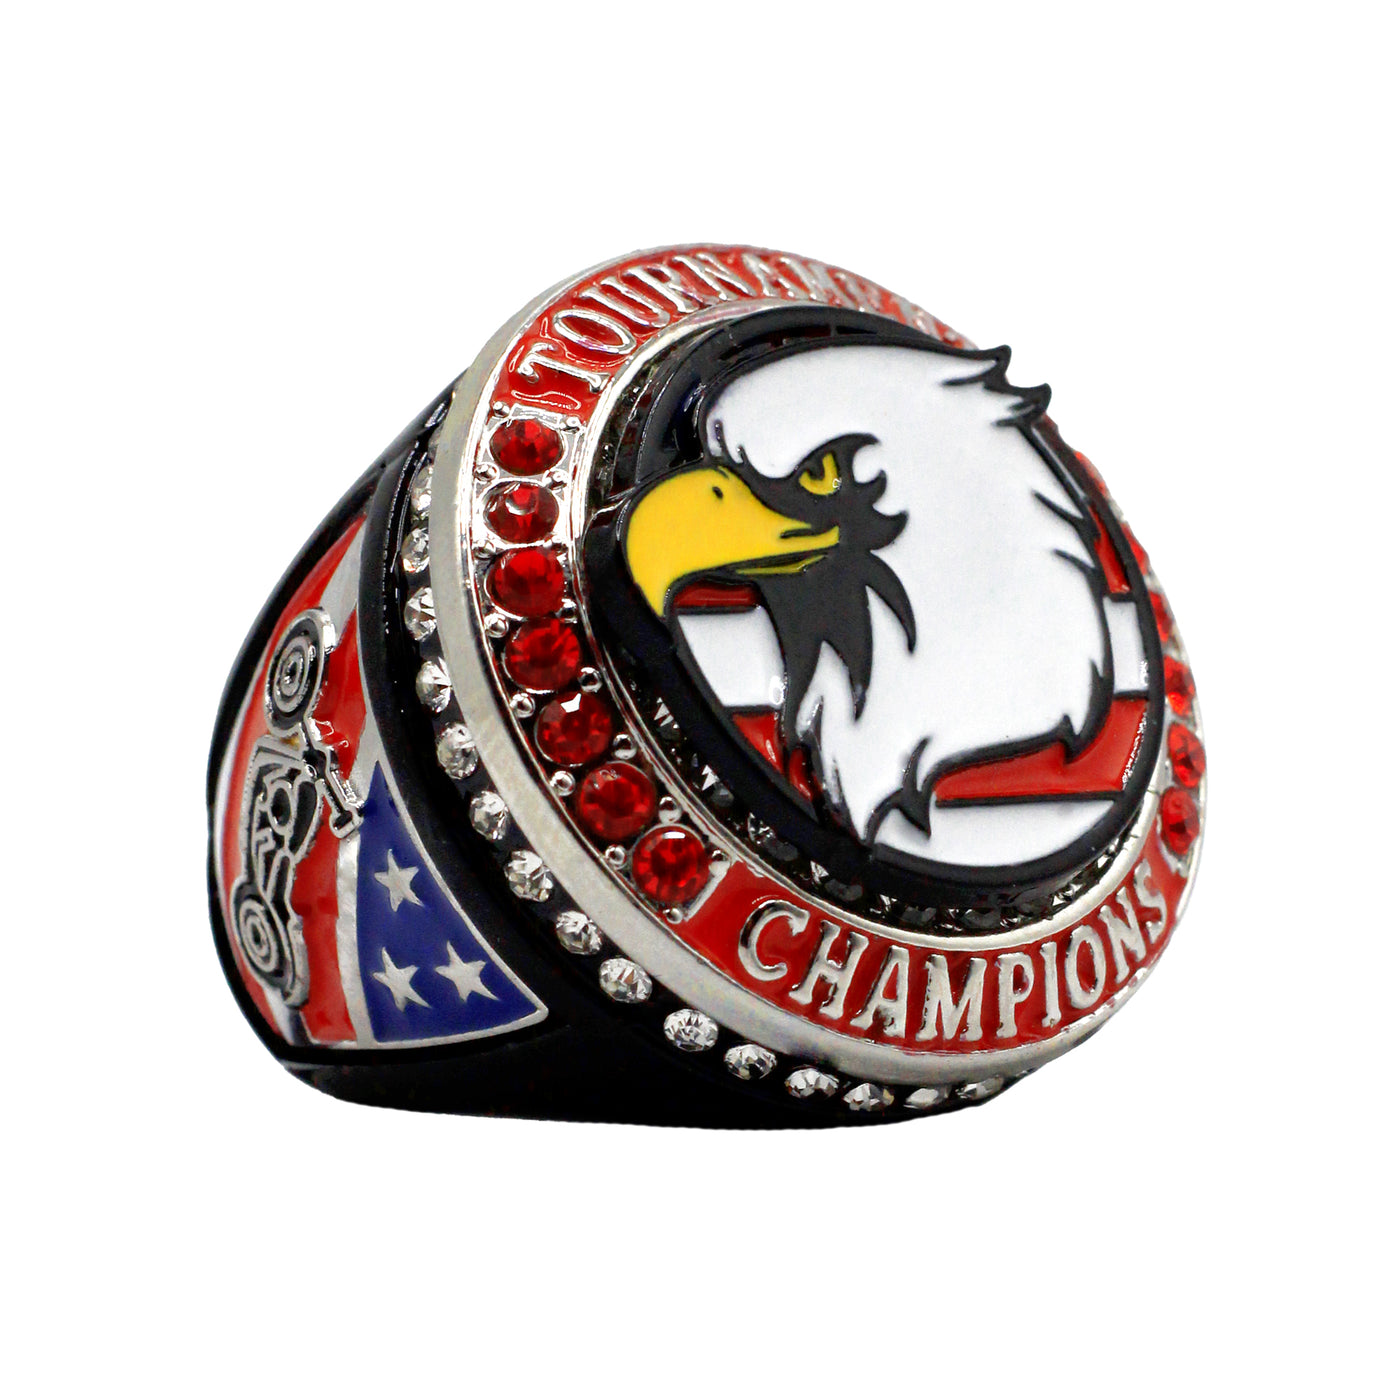 MEMORIAL DAY EAGLE USA TOURNAMENT CHAMPIONS RING